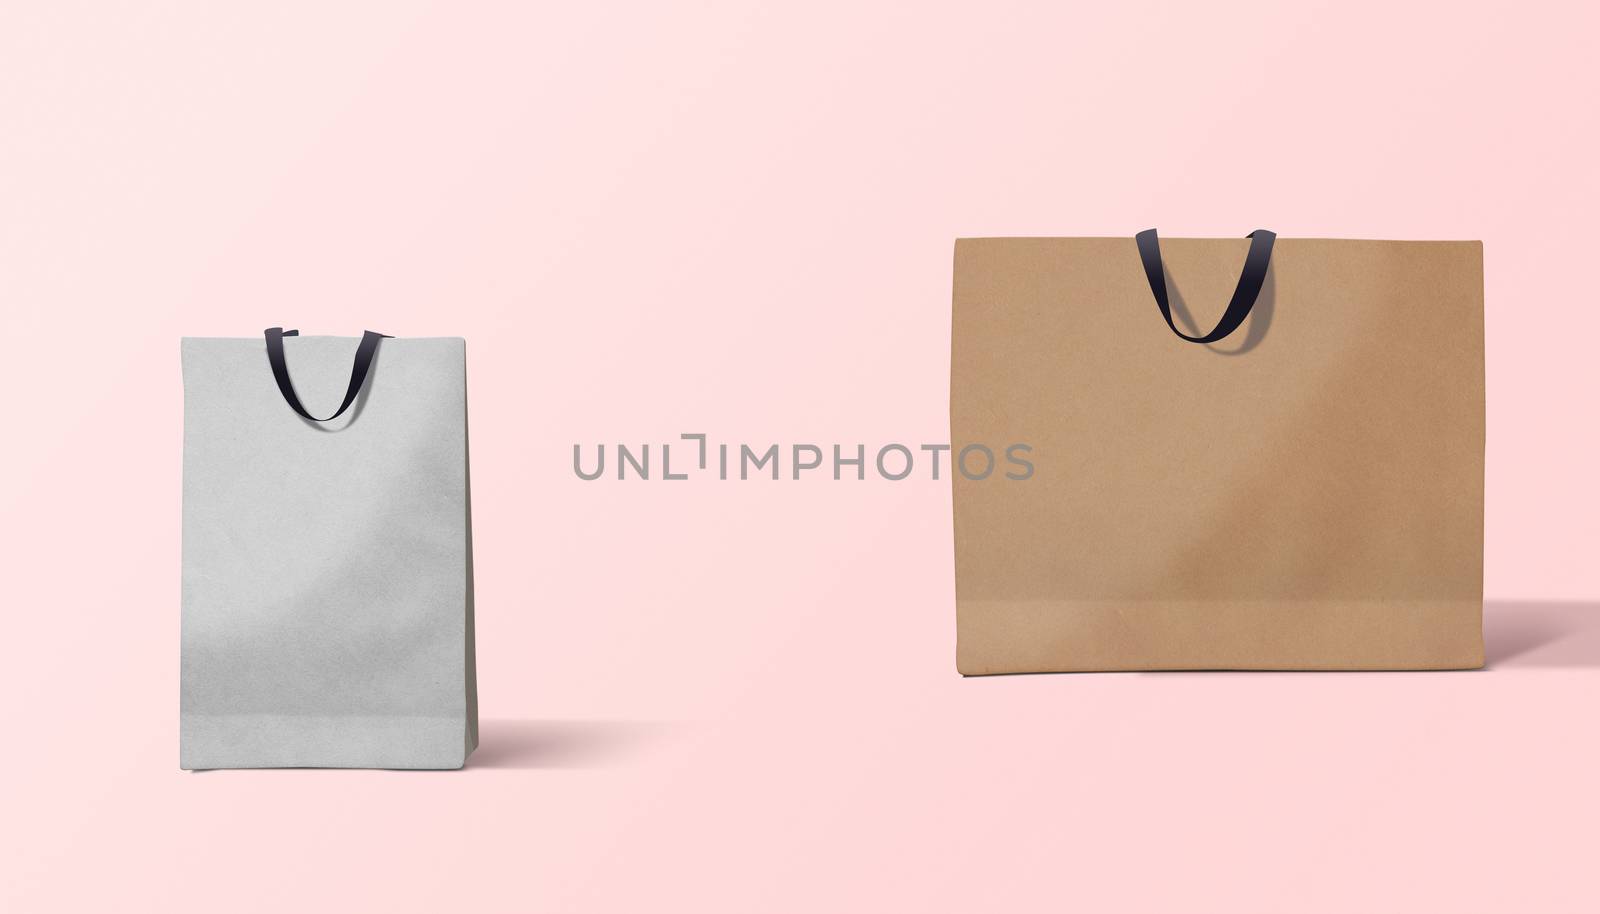 Two paper bags for shopping on a pink background